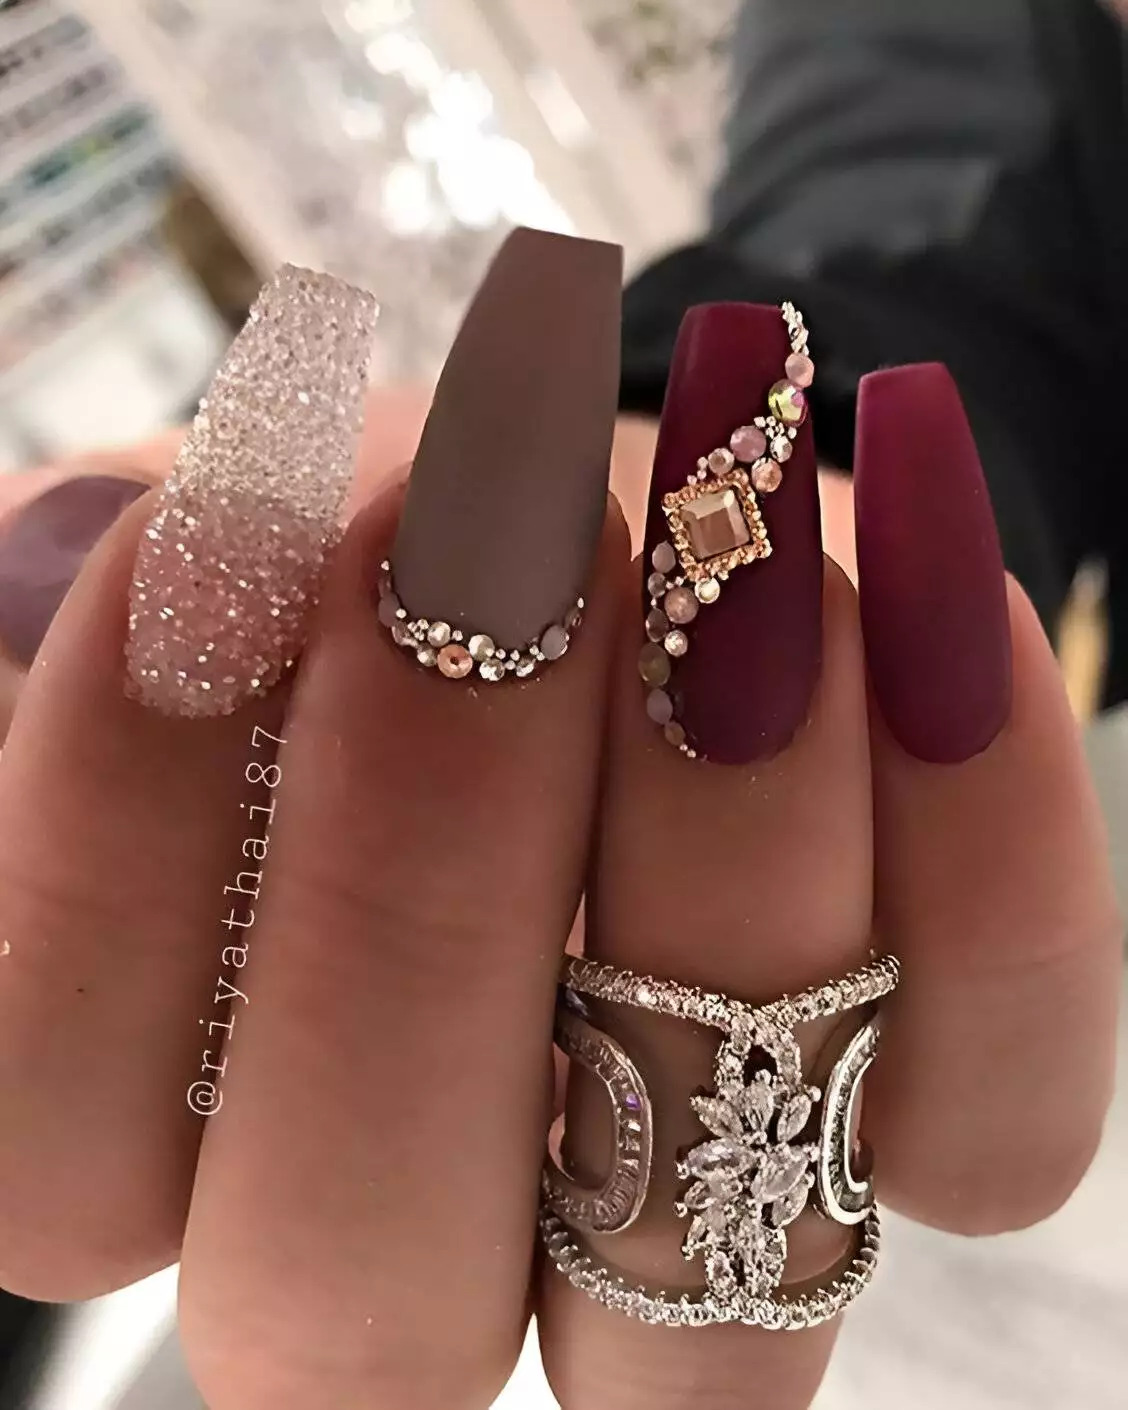 Glamorous Red Wine Nails For Holiday